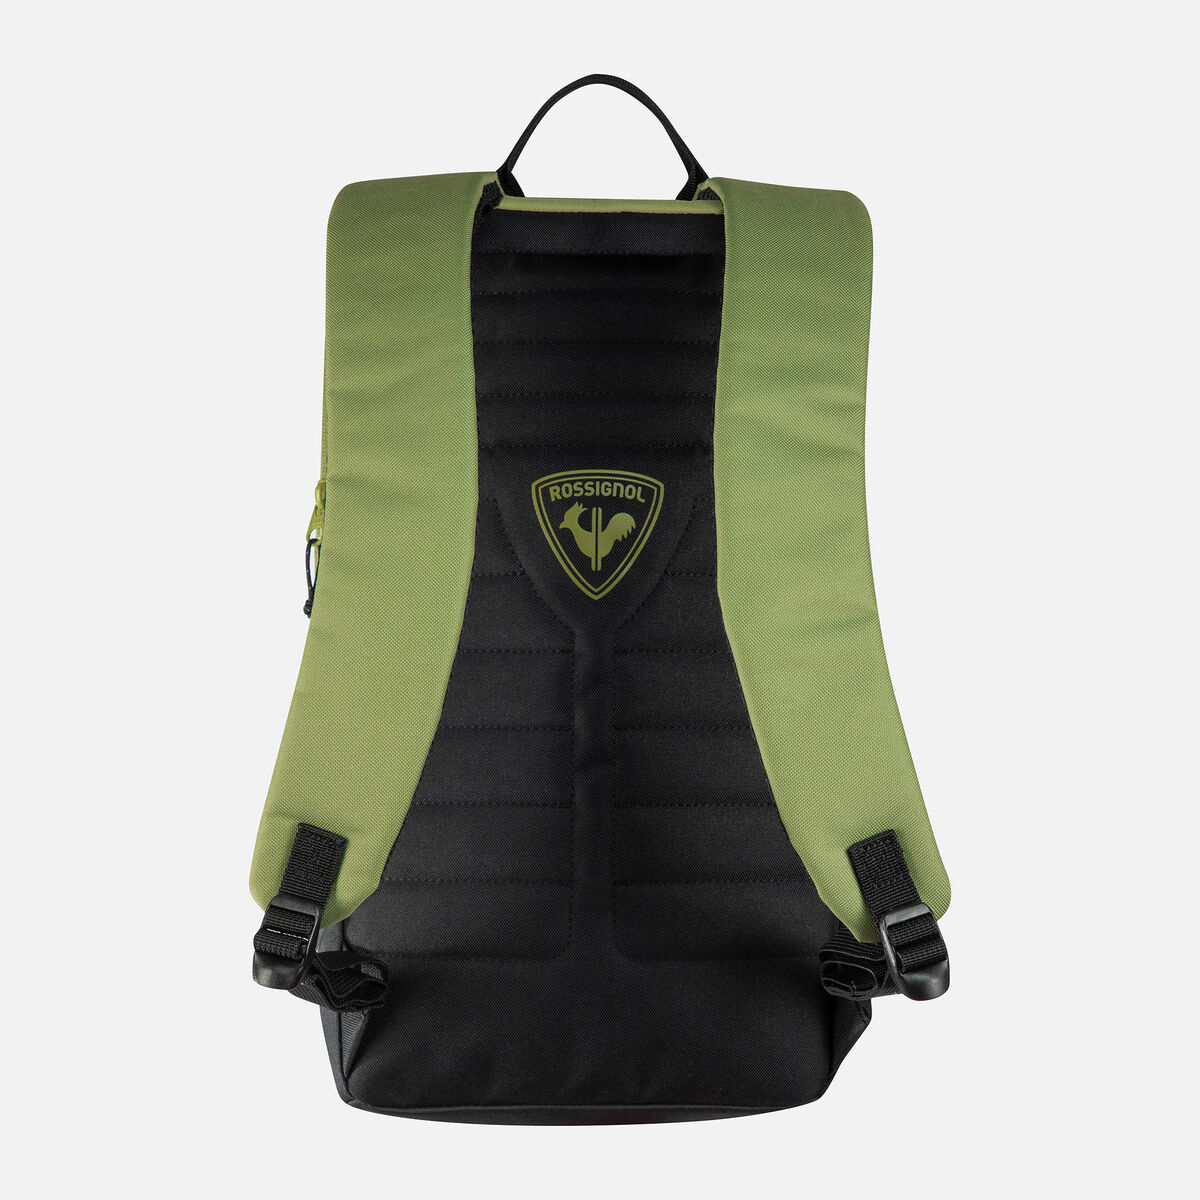 Back to the Games 14L Backpack